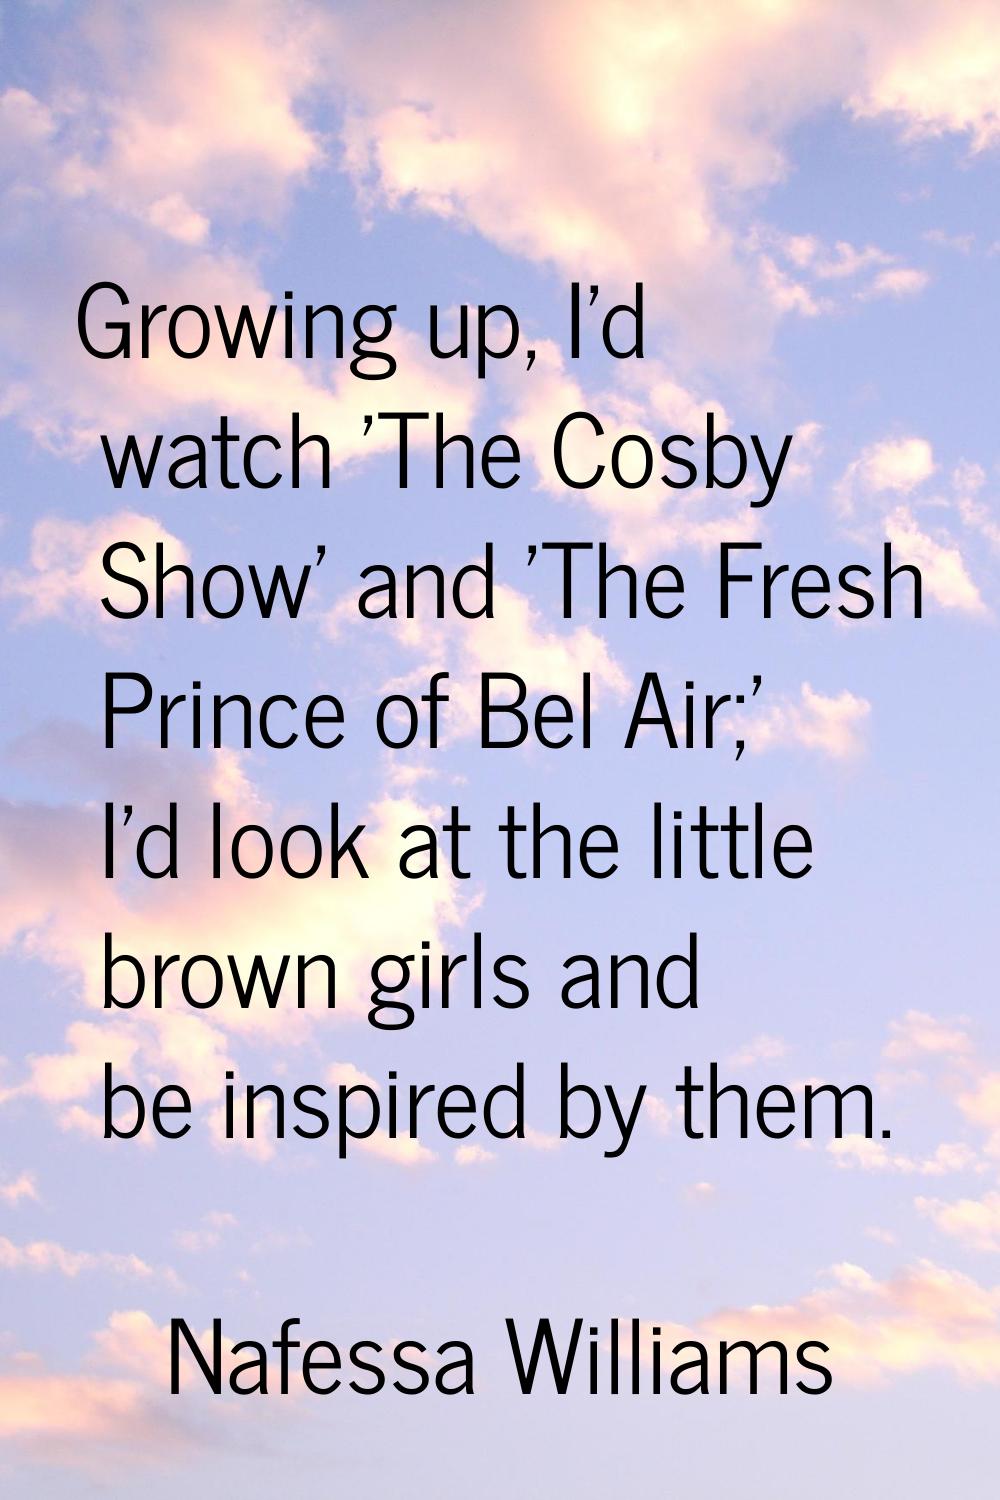 Growing up, I'd watch 'The Cosby Show' and 'The Fresh Prince of Bel Air;' I'd look at the little br